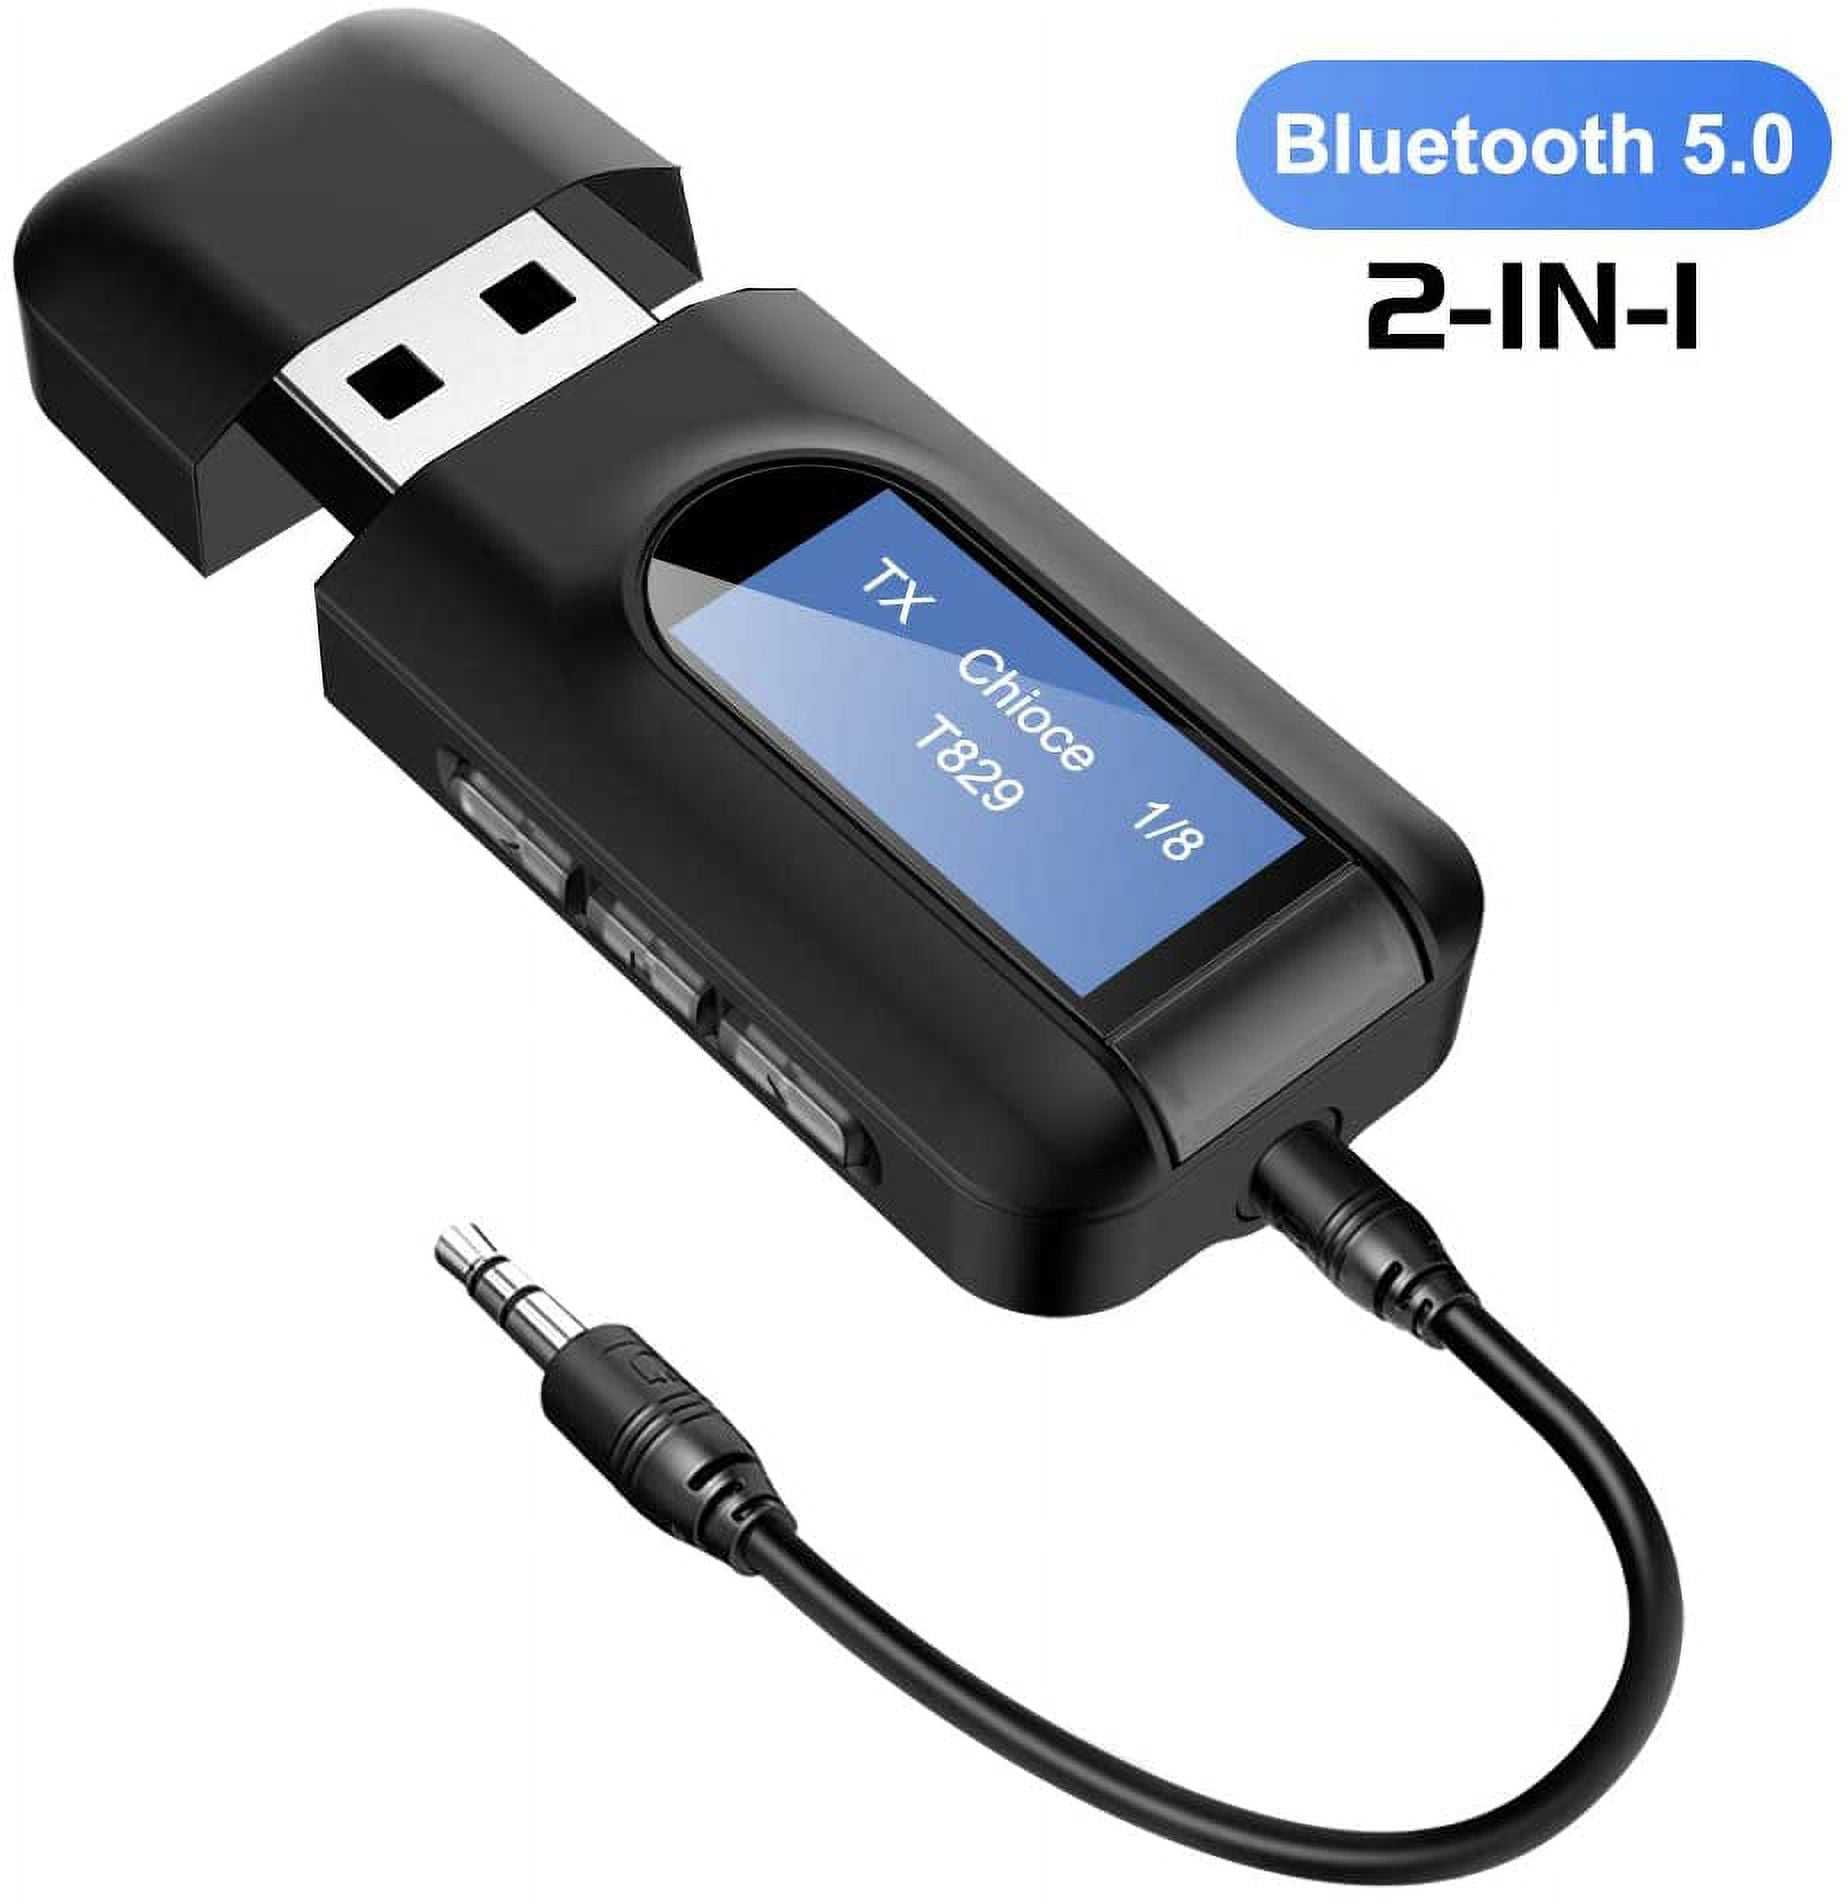  Bluetooth Adapter For Tv